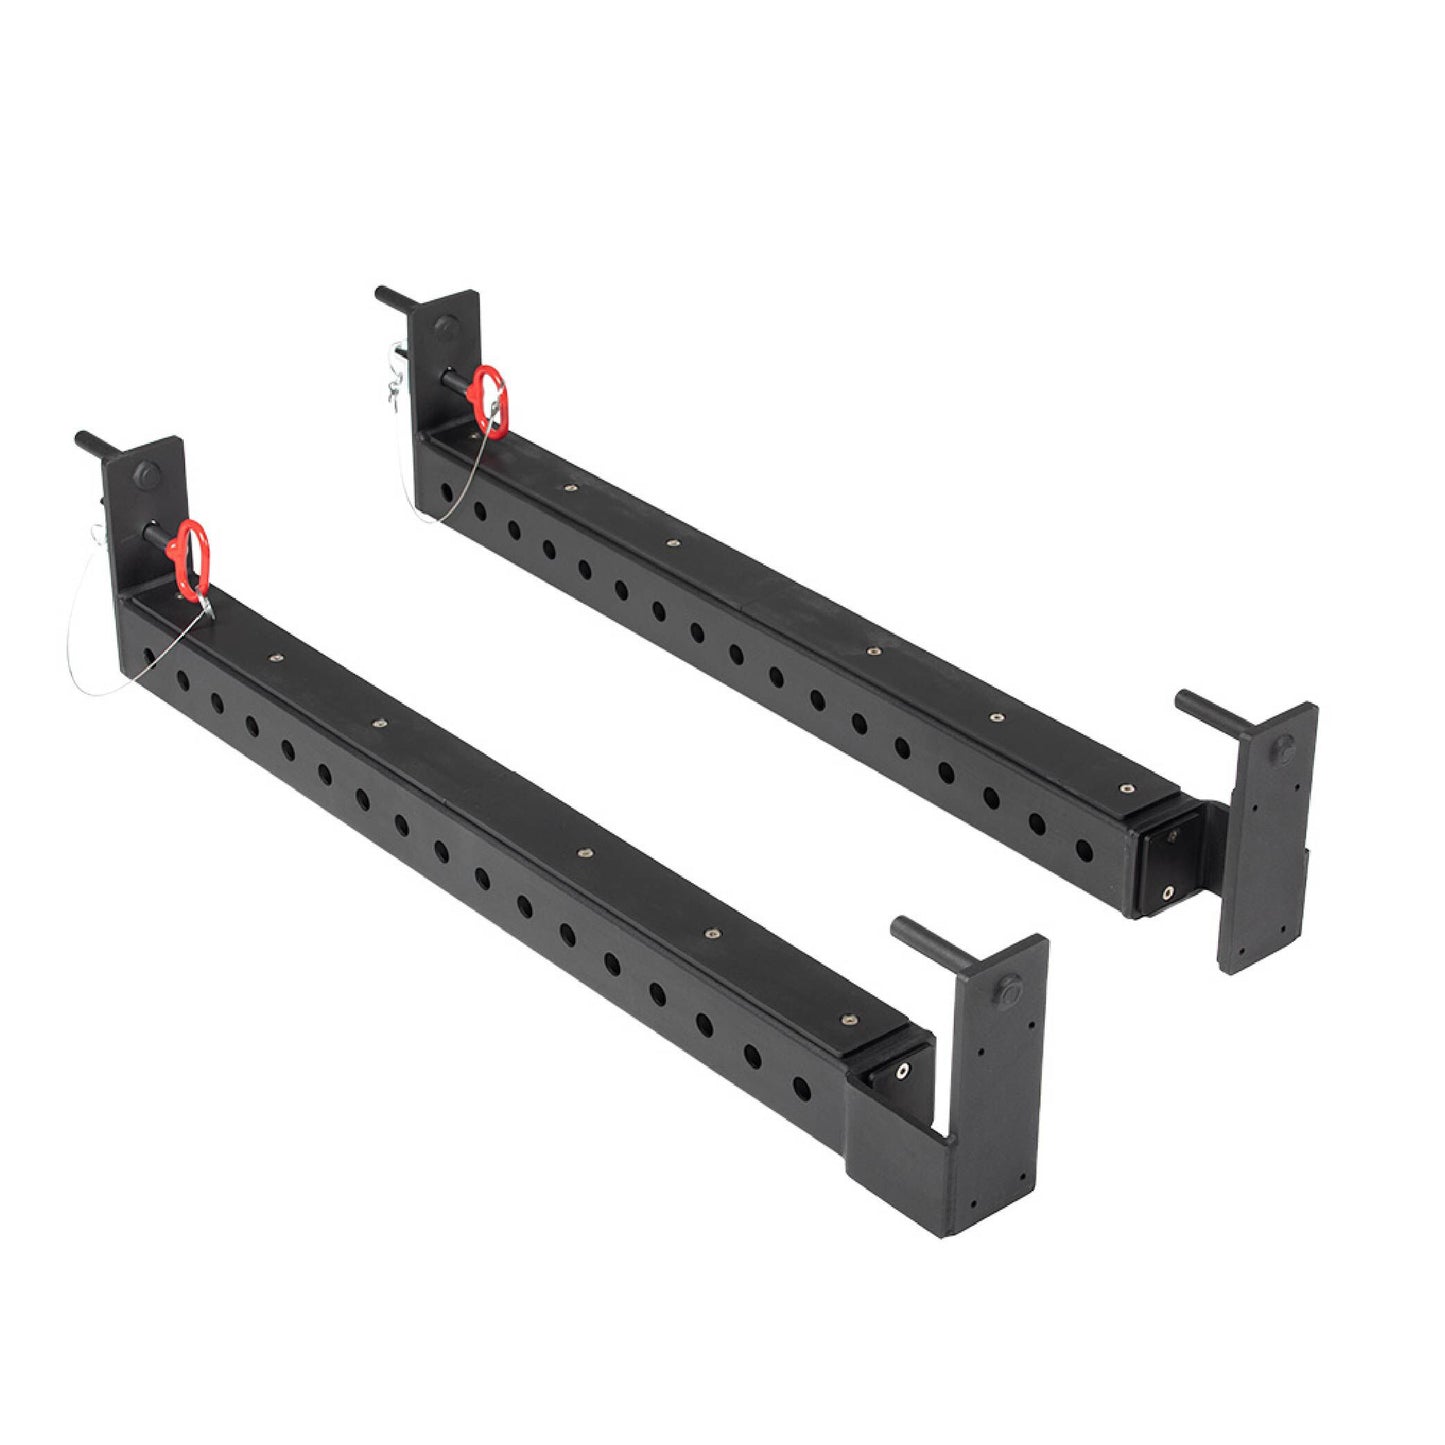 X-3 Series 36" Flip-Down Safety Bars - view 1